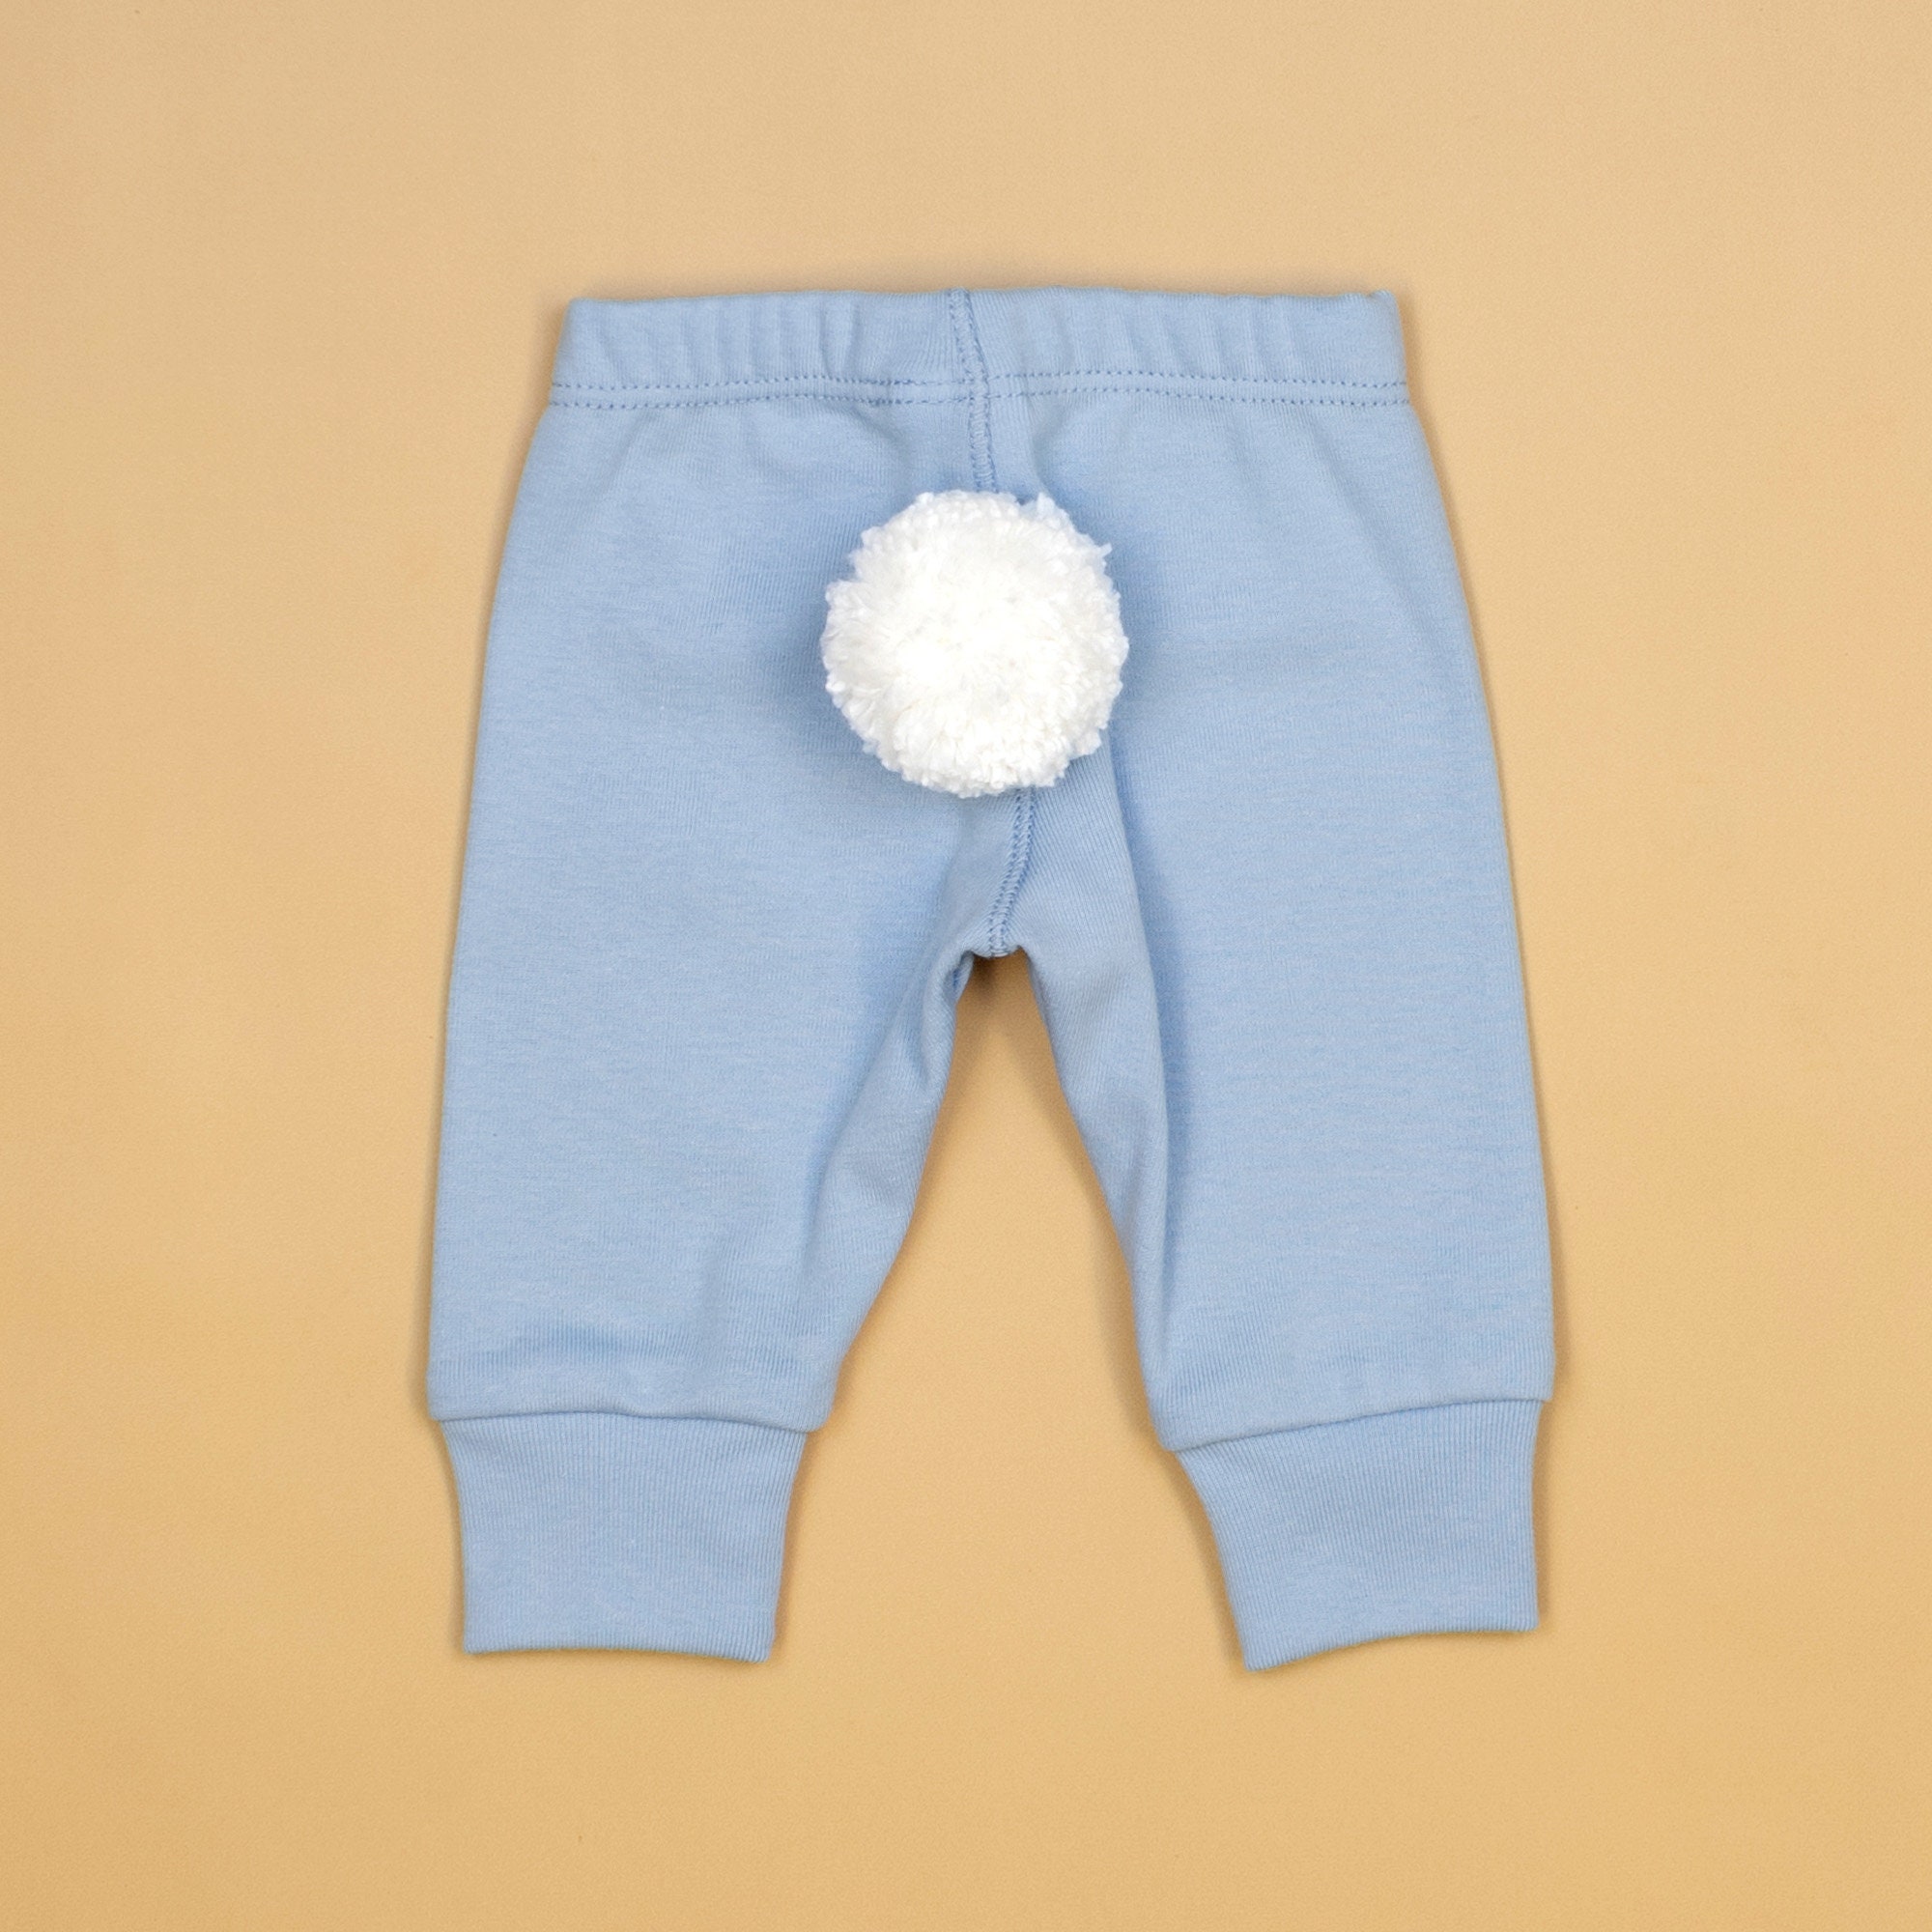 Easter Baby Pants W/ WHITE BUNNY TAIL. Handmade 100% Cotton Infant Pants  With Detachable Tail. Tan Blue Mint Cream Pink. Baby Boy Baby Girl 